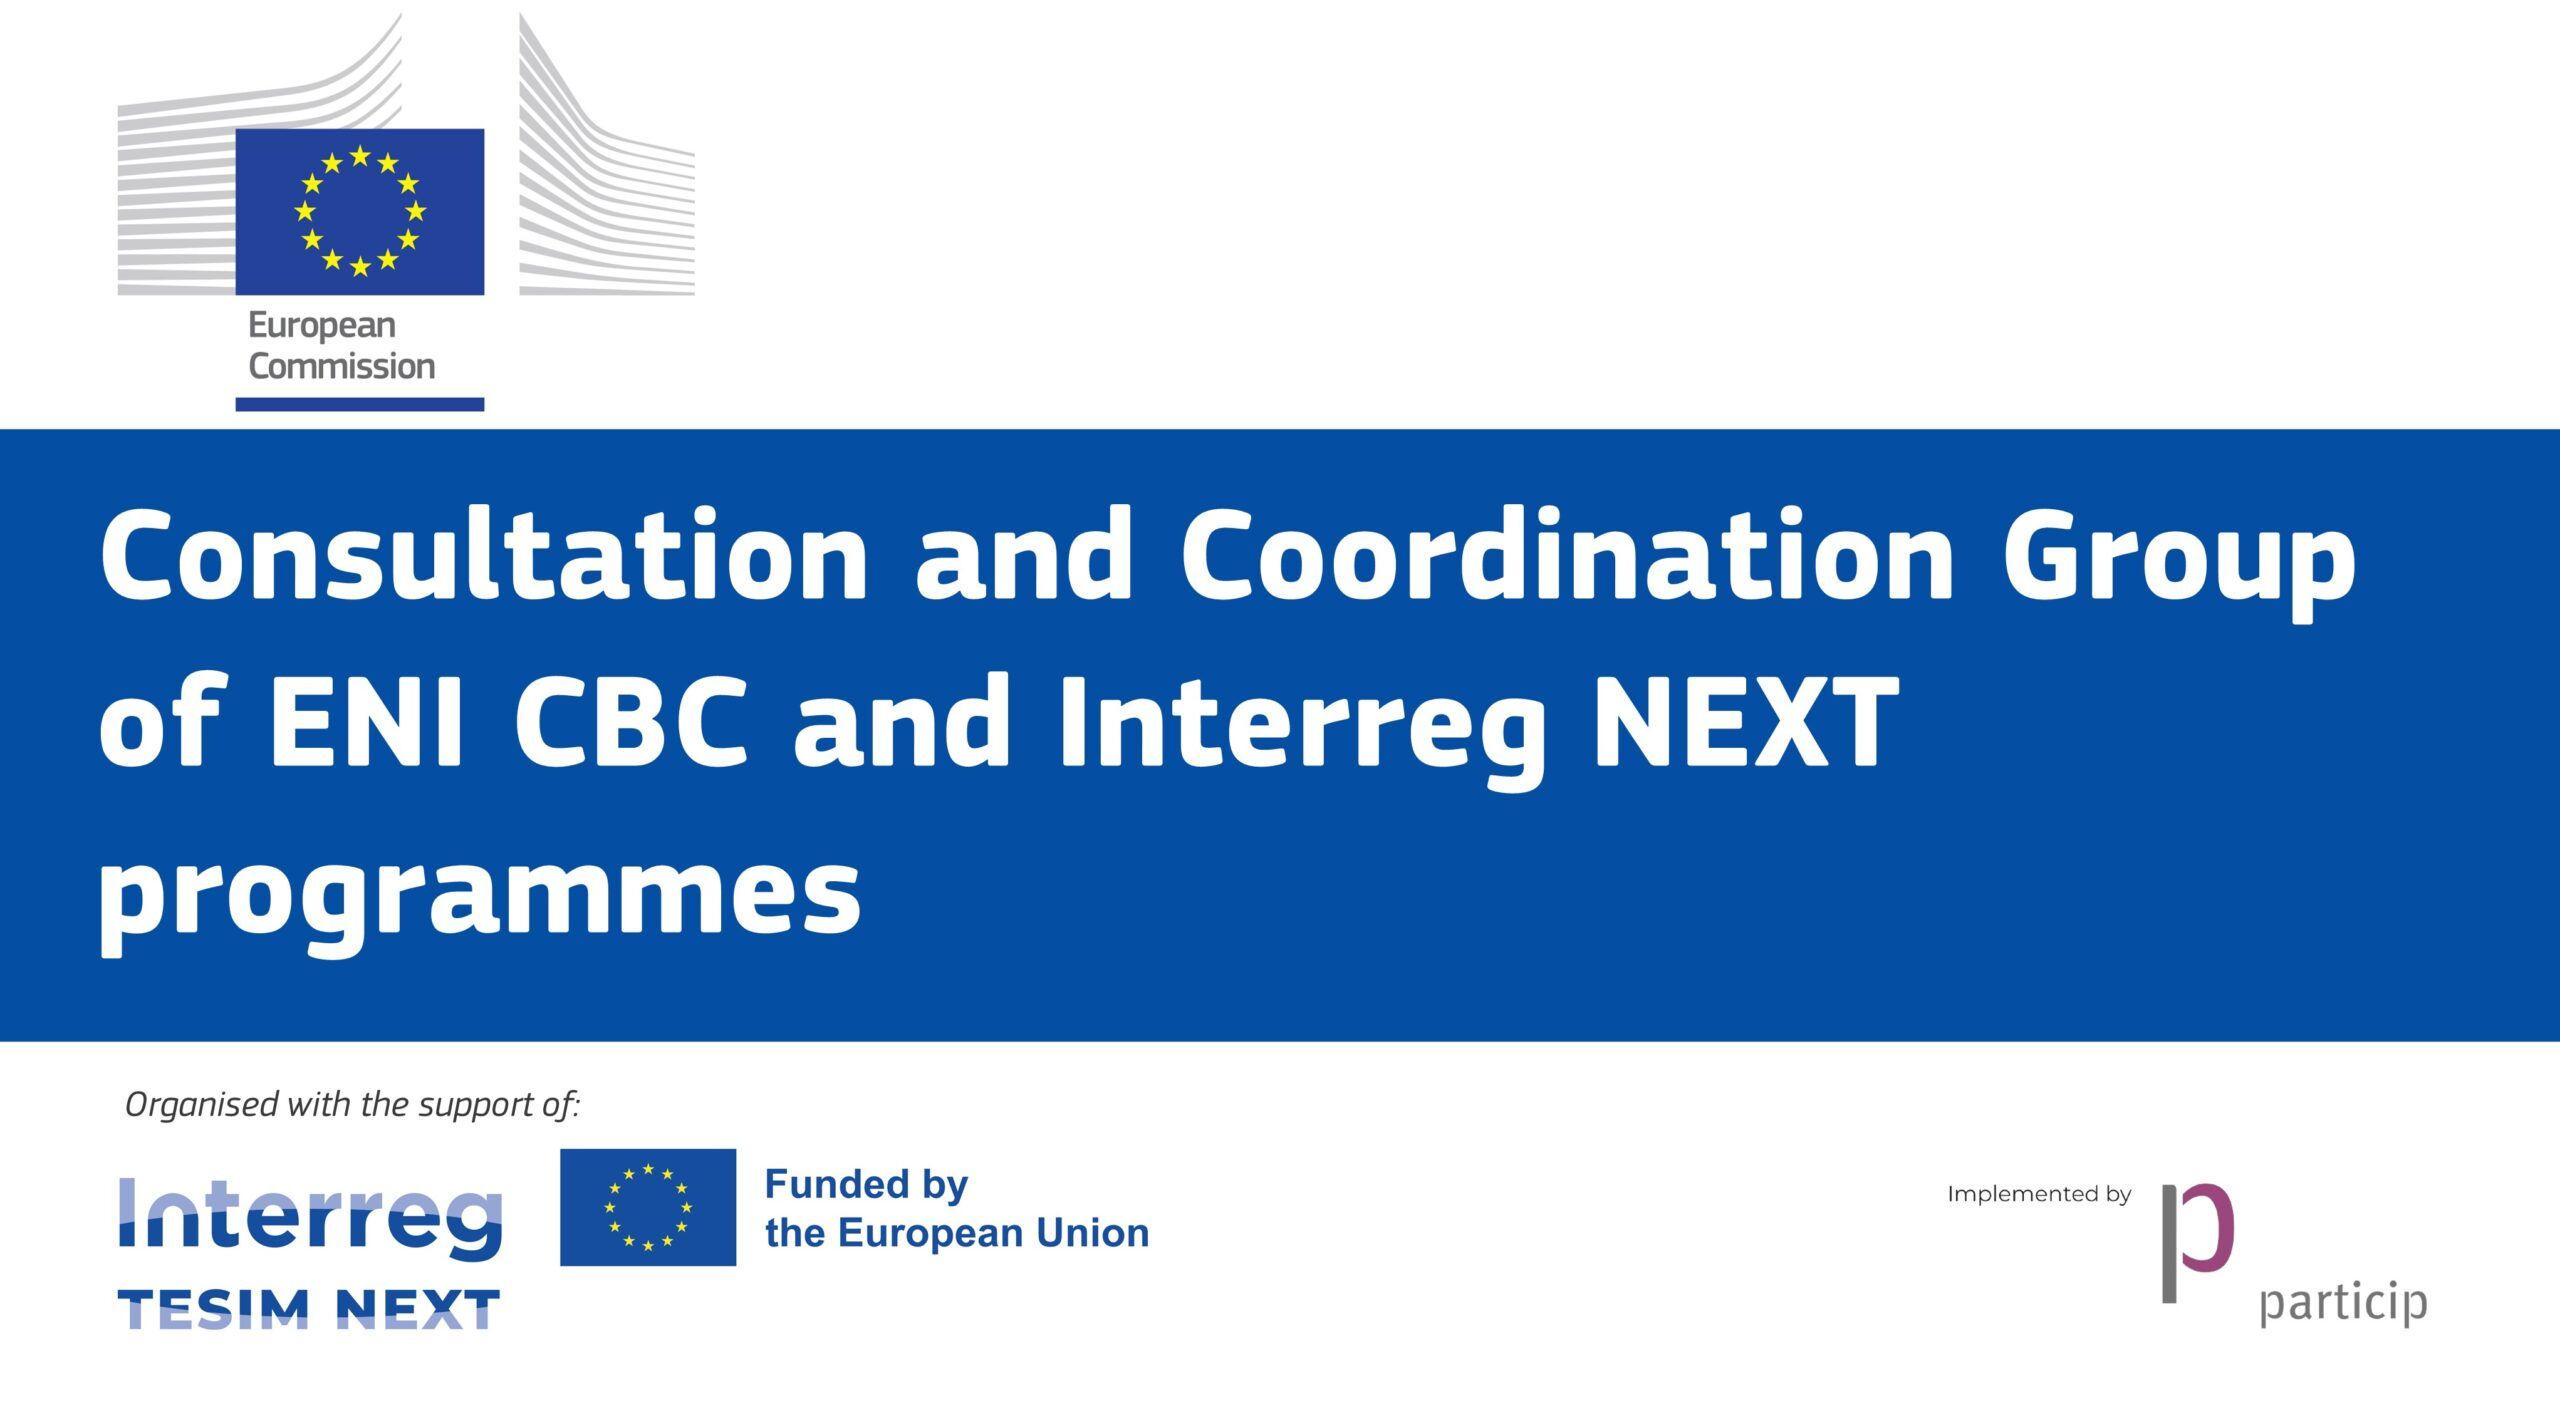 Meeting of the Consultation and Coordination Group of ENI CBC and Interreg NEXT programmes